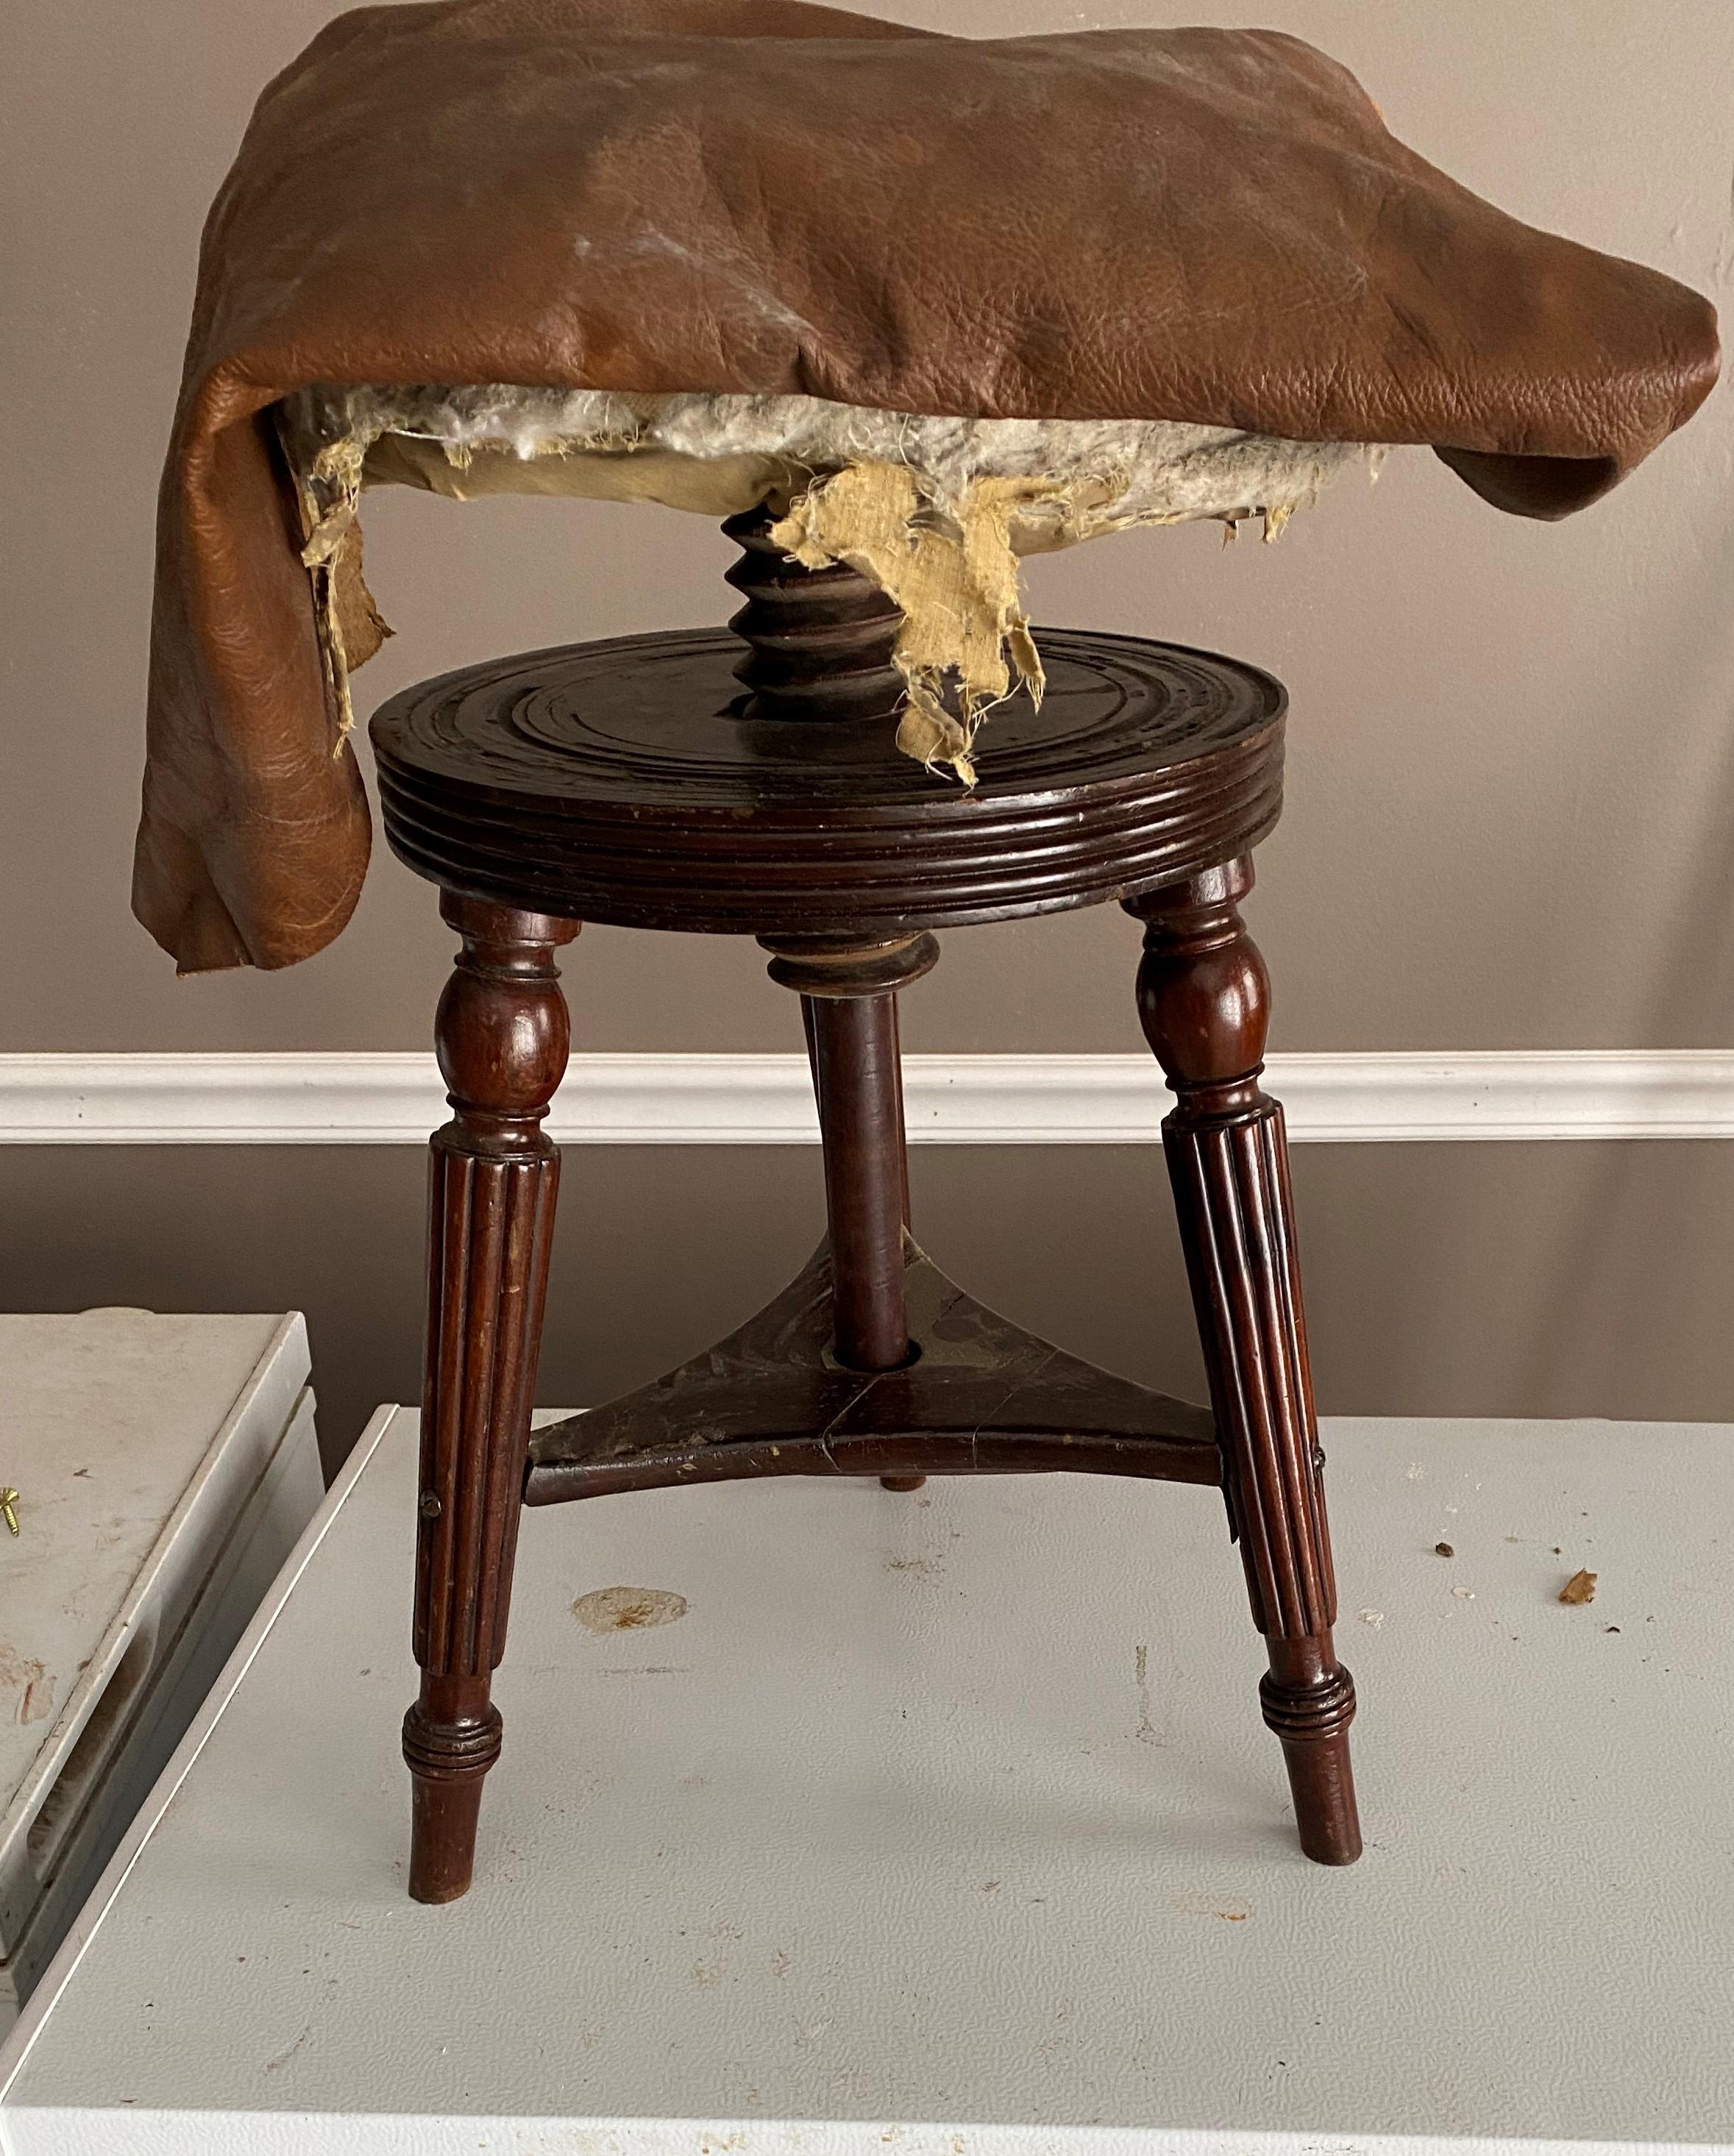 Adjustable piano stool, I wanted to cover it in leather and use brass studs' for a Fine finished look and never took the time. You can do it. Height is adjustable. I throw in the leather unless you don't want it. Reeded leg.  This is a choice